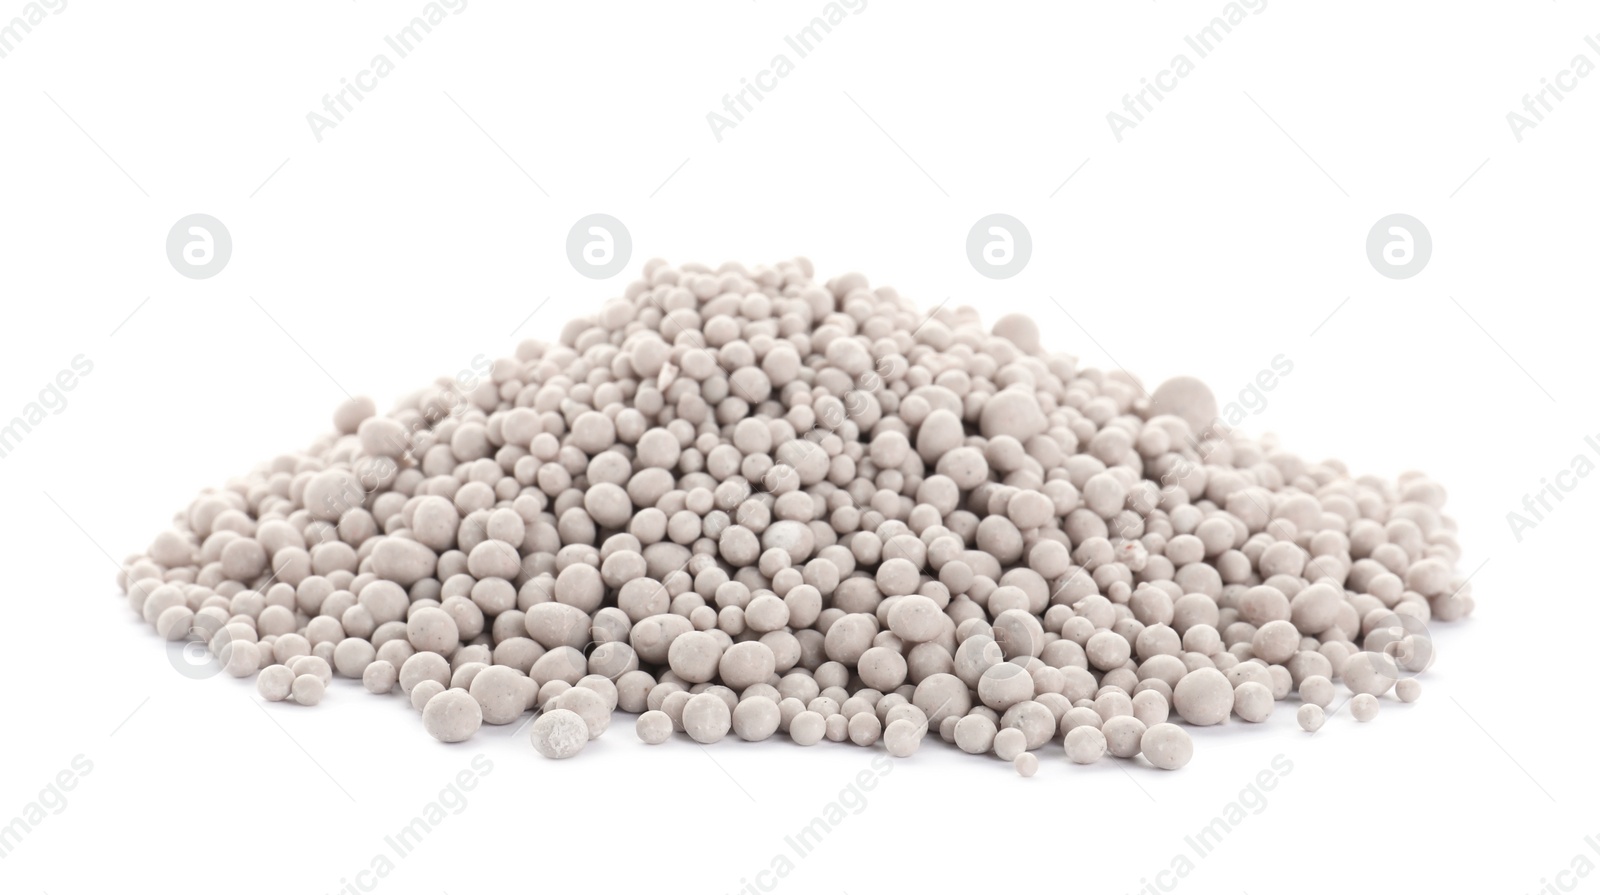 Photo of Pile of chemical fertilizer isolated on white. Gardening time